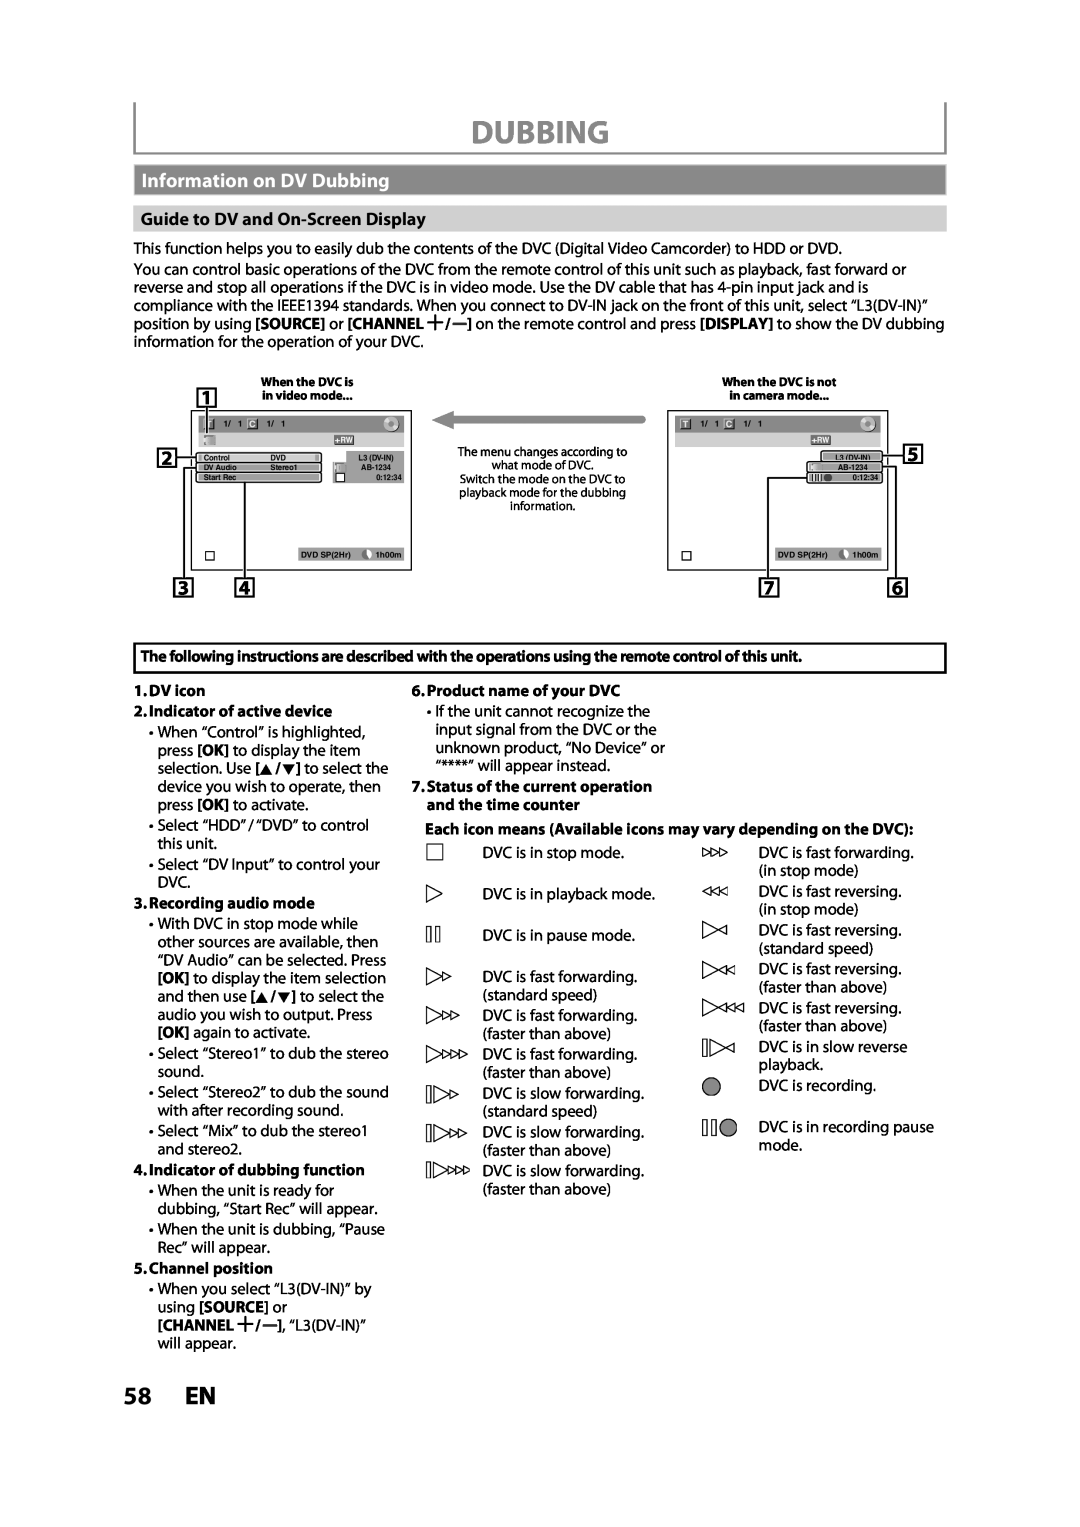 Magnavox MDR533H 58 EN, Information on DV Dubbing, Guide to DV and On-Screen Display, DV icon, Indicator of active device 